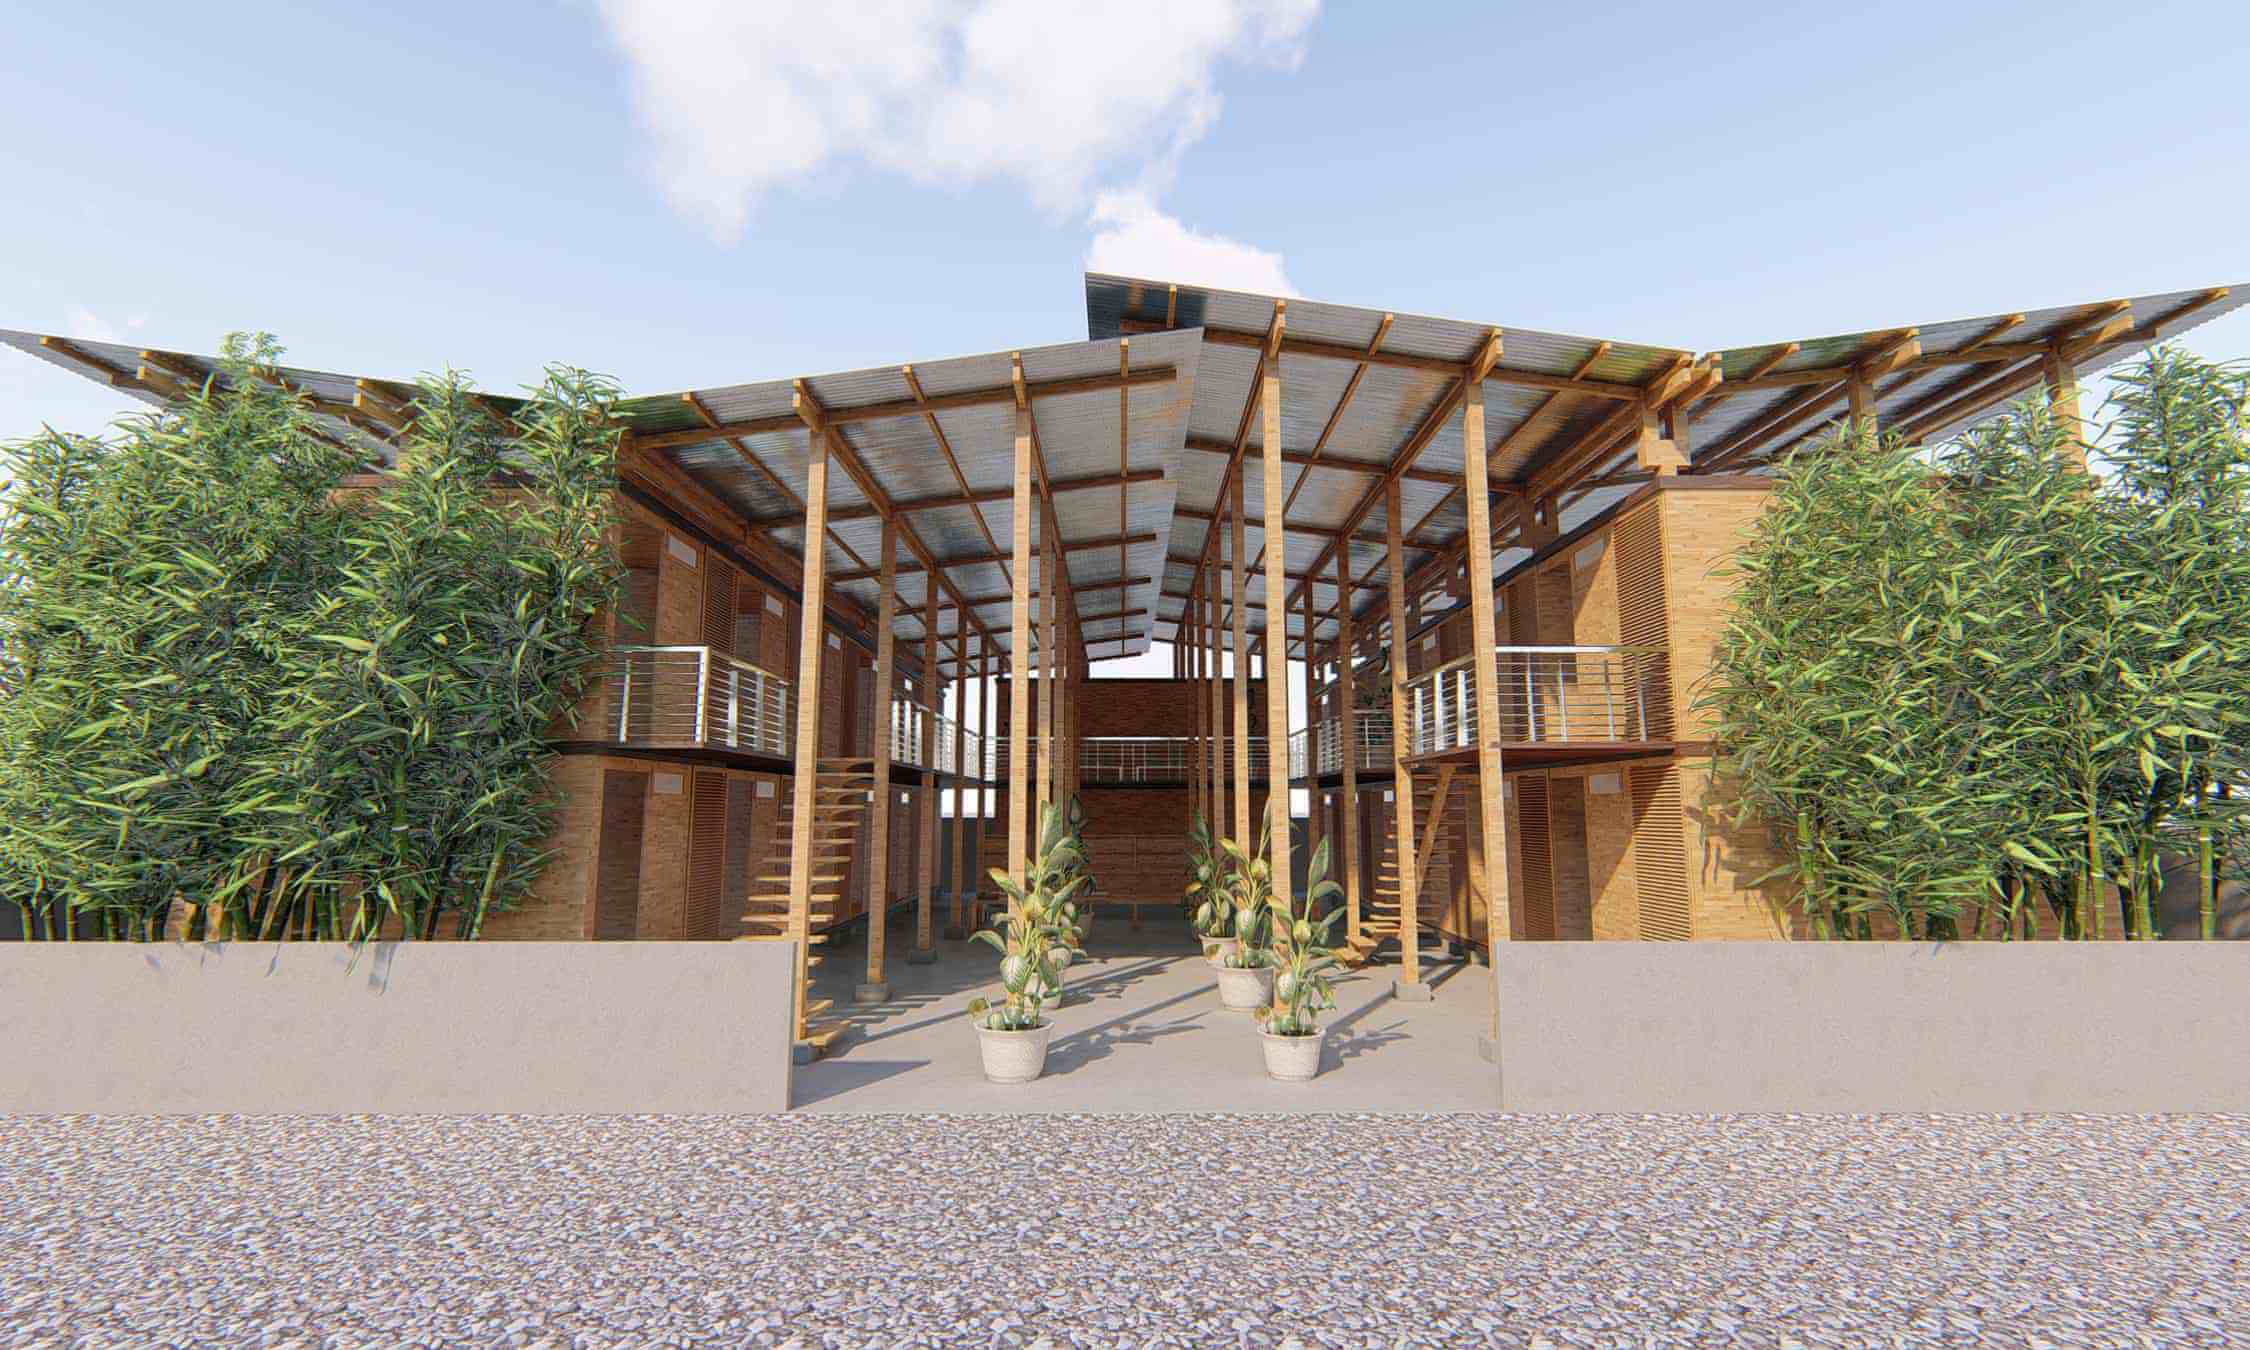 Low Cost Bamboo House Design By Filipino Wins International Top Prize